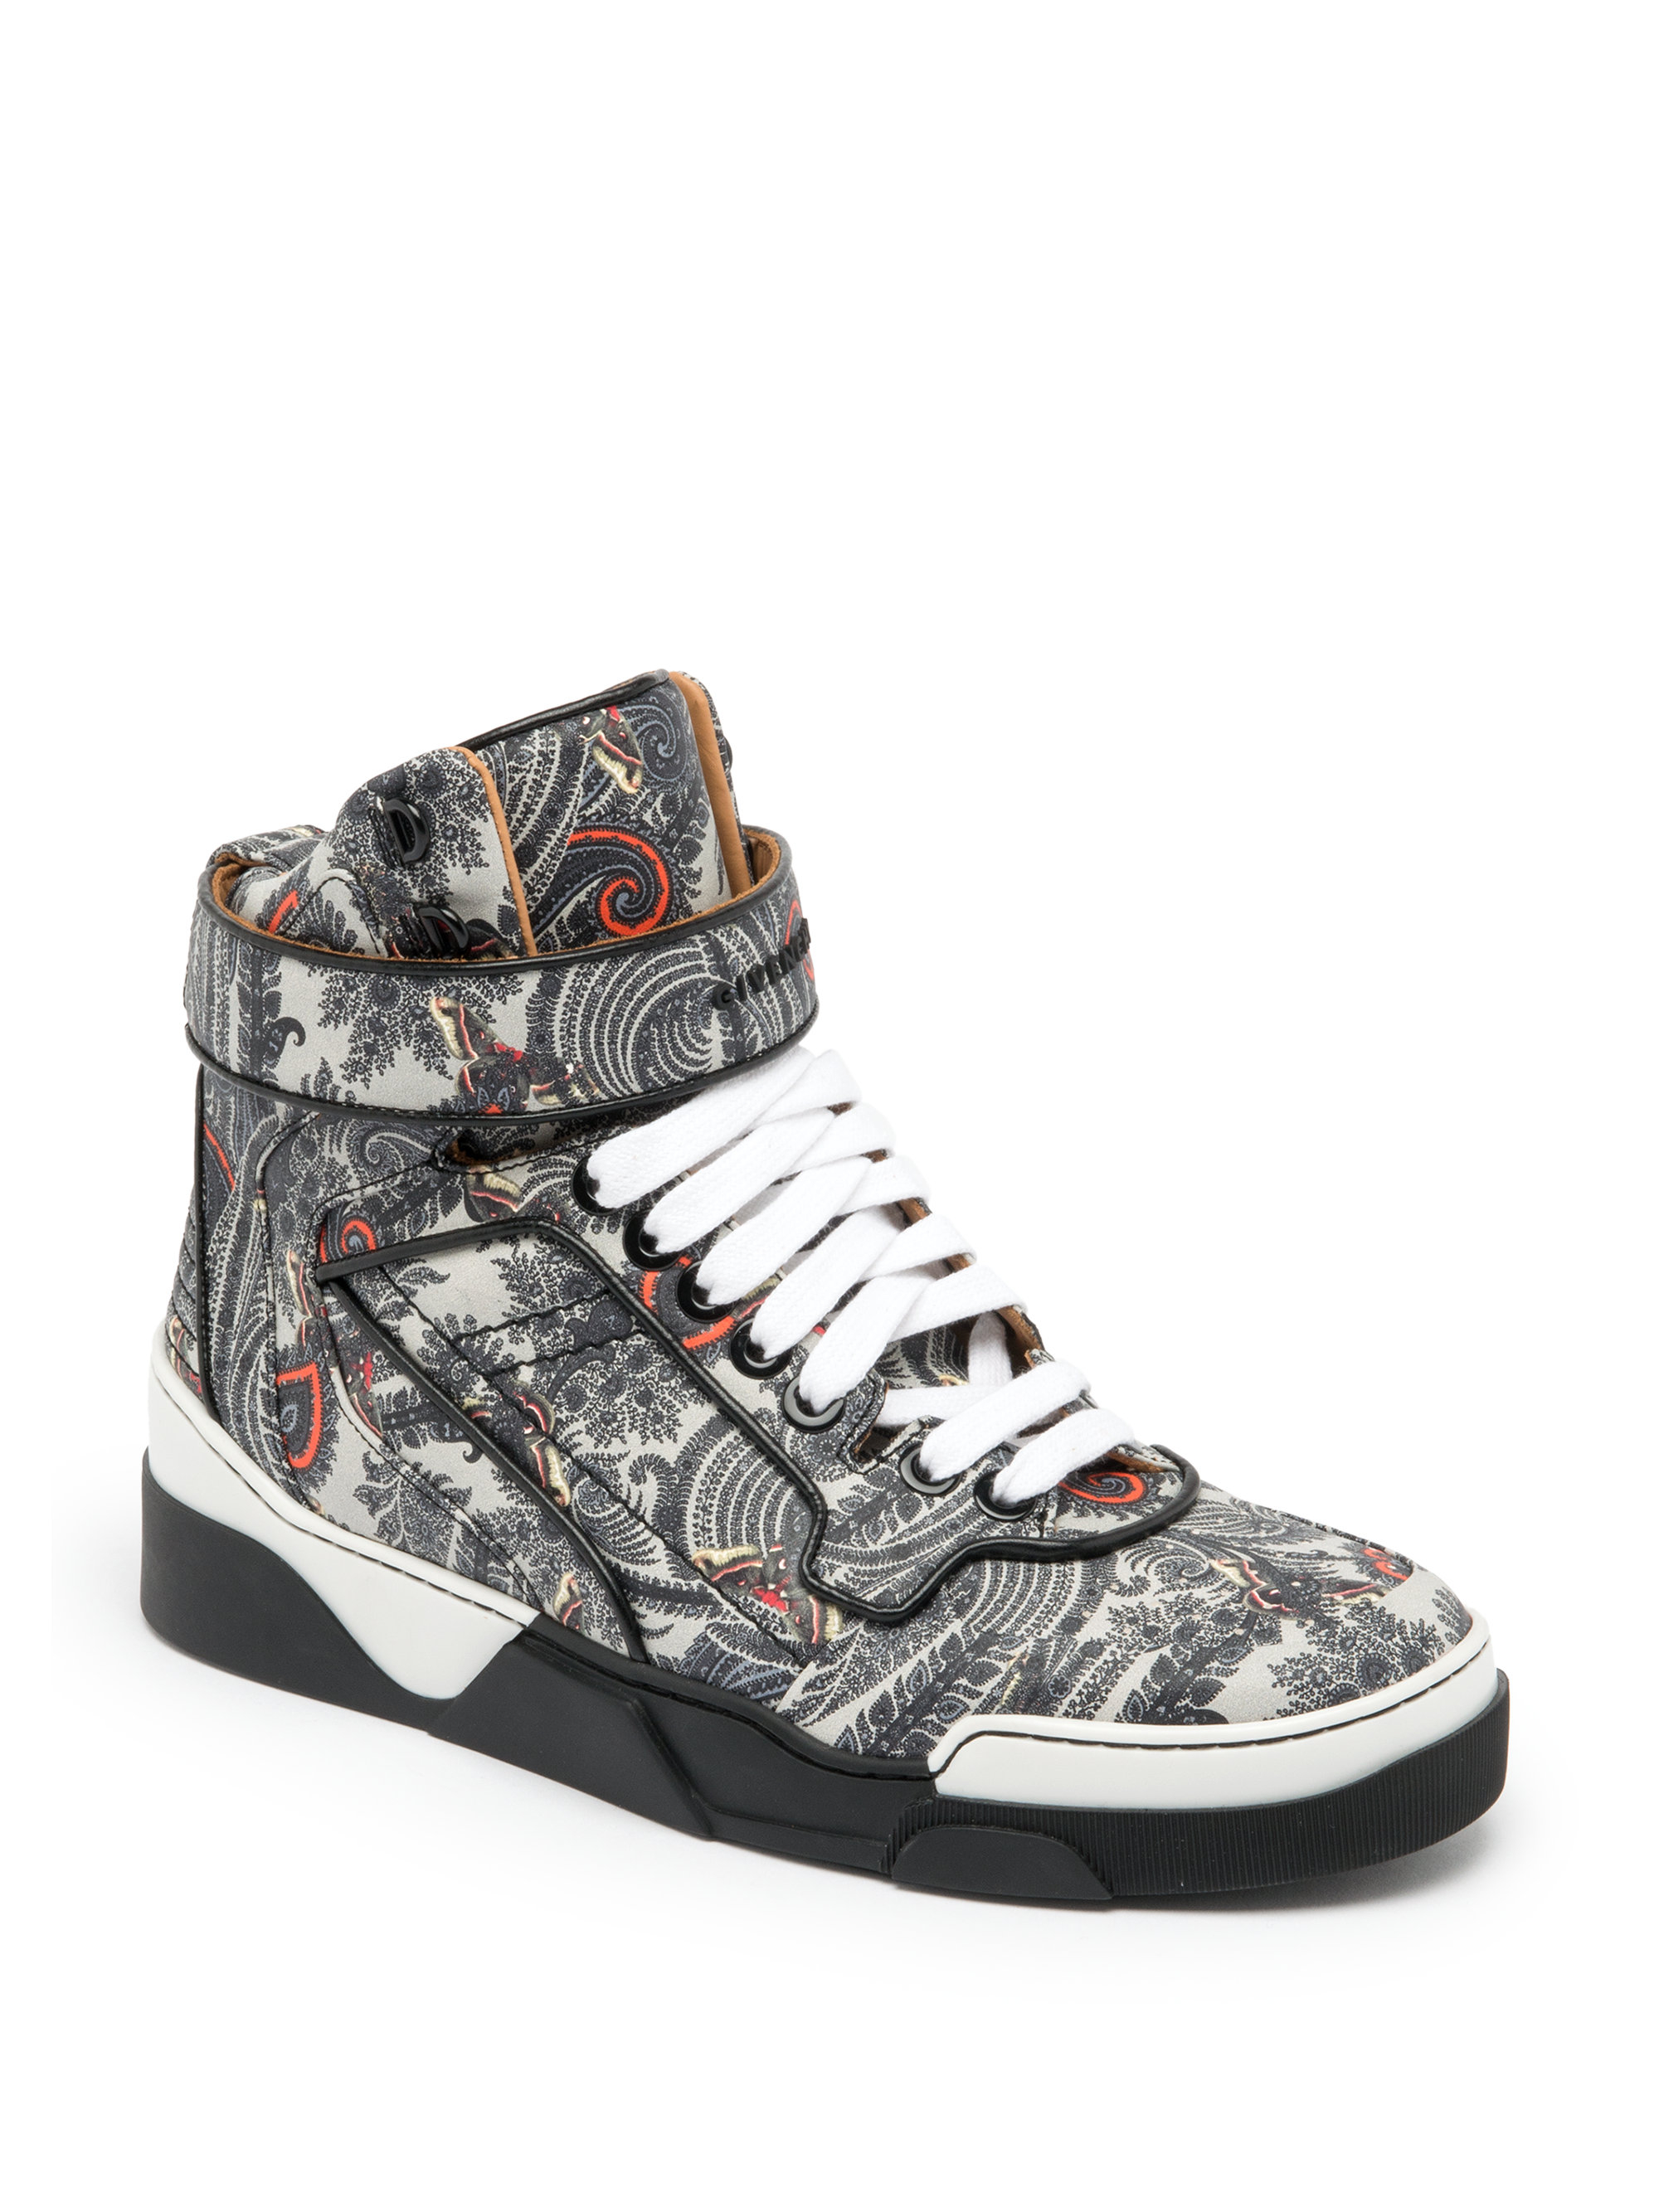 Lyst - Givenchy Tyson High-Top Sneakers for Men